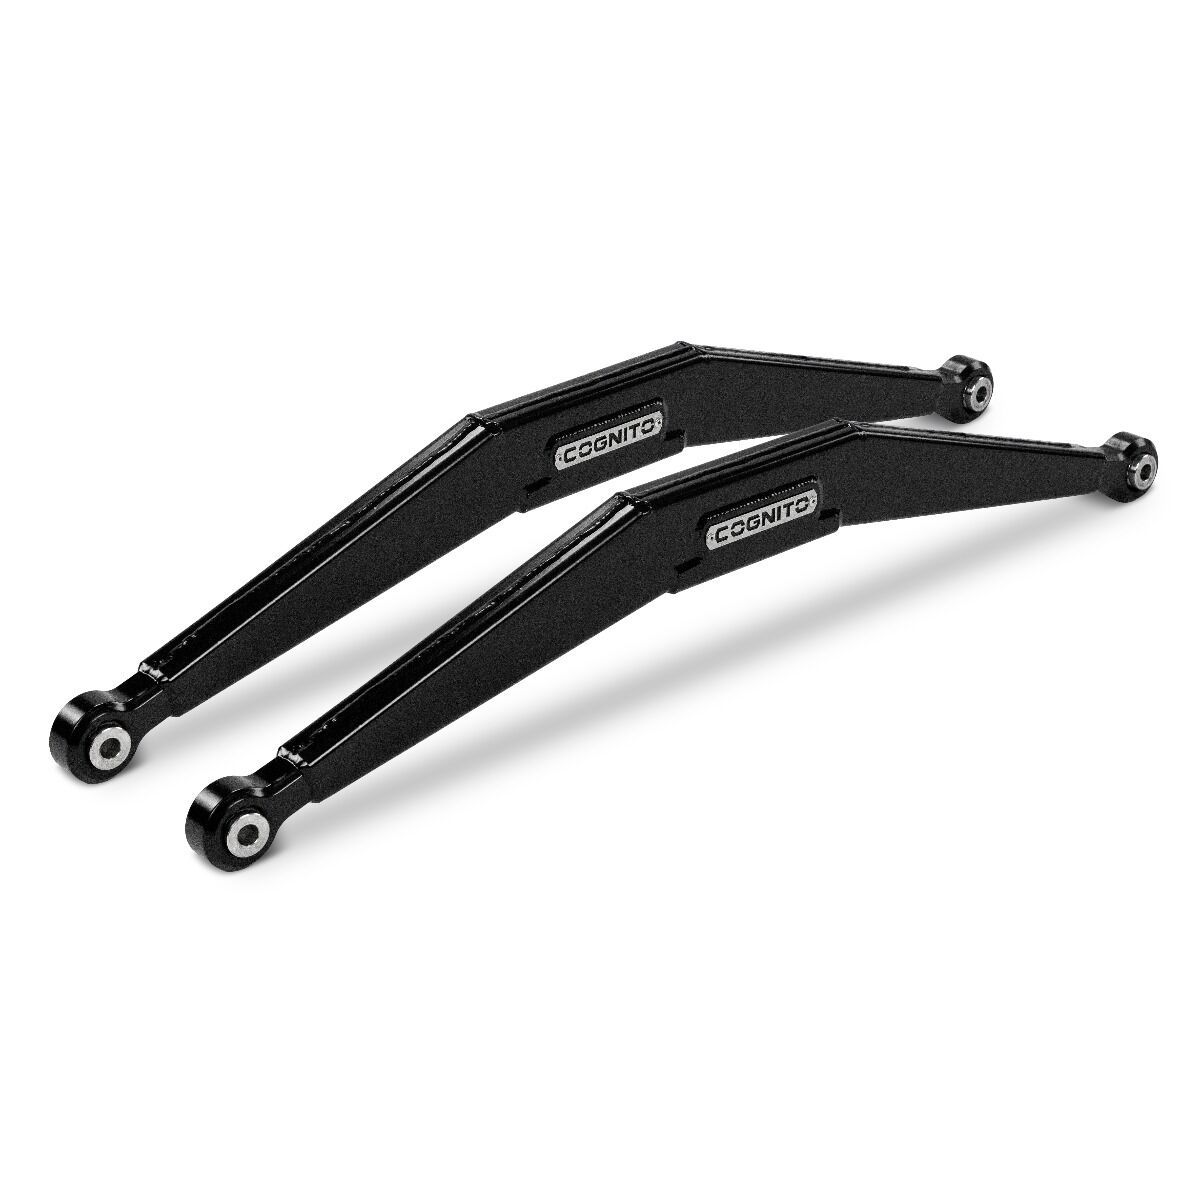 Cognito Motorsports - Cognito High Clearance Lower Radius Rod Kit for 2018-2021 Polaris RZR Turbo S